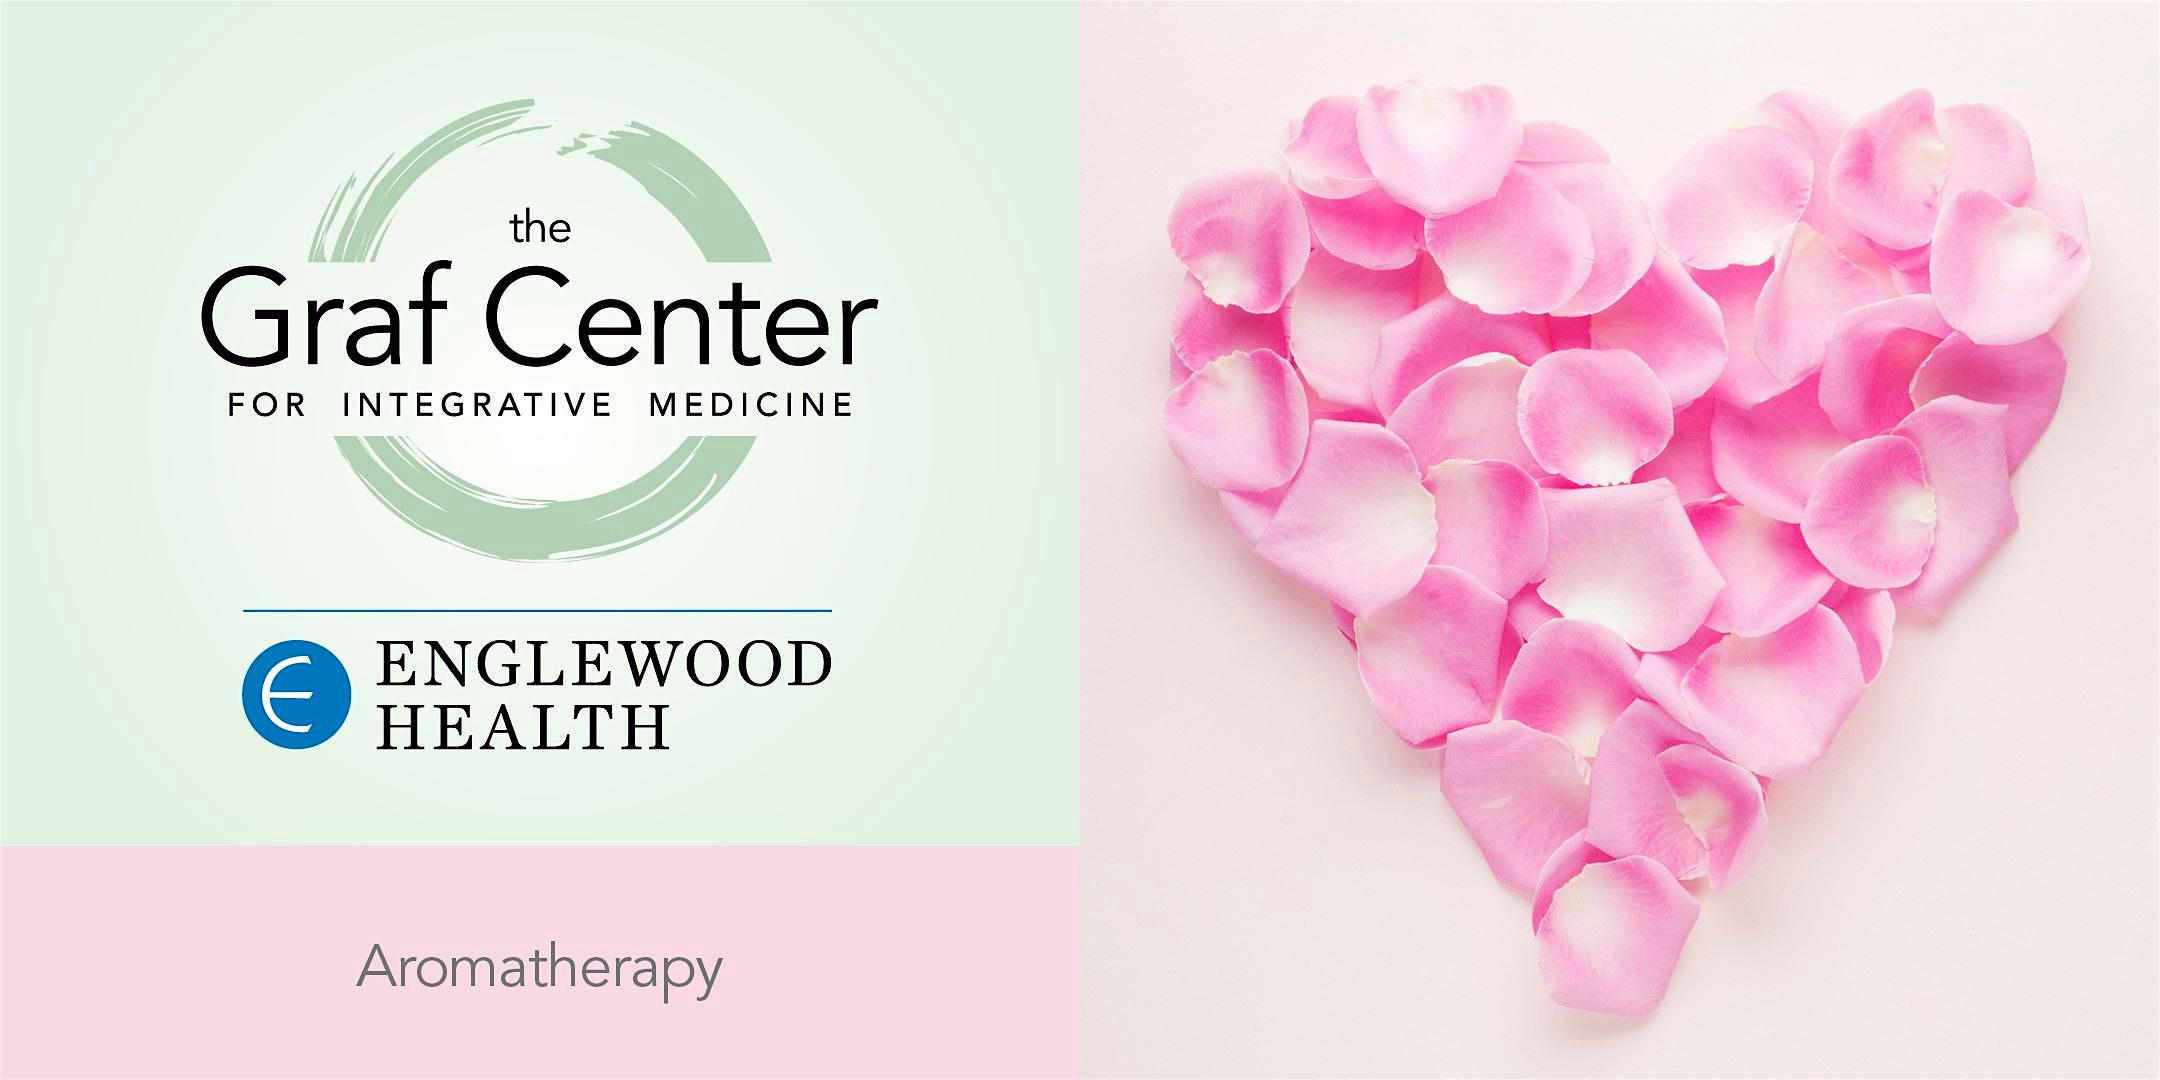 More info: Aromatherapy for Valentine’s Day - February 3